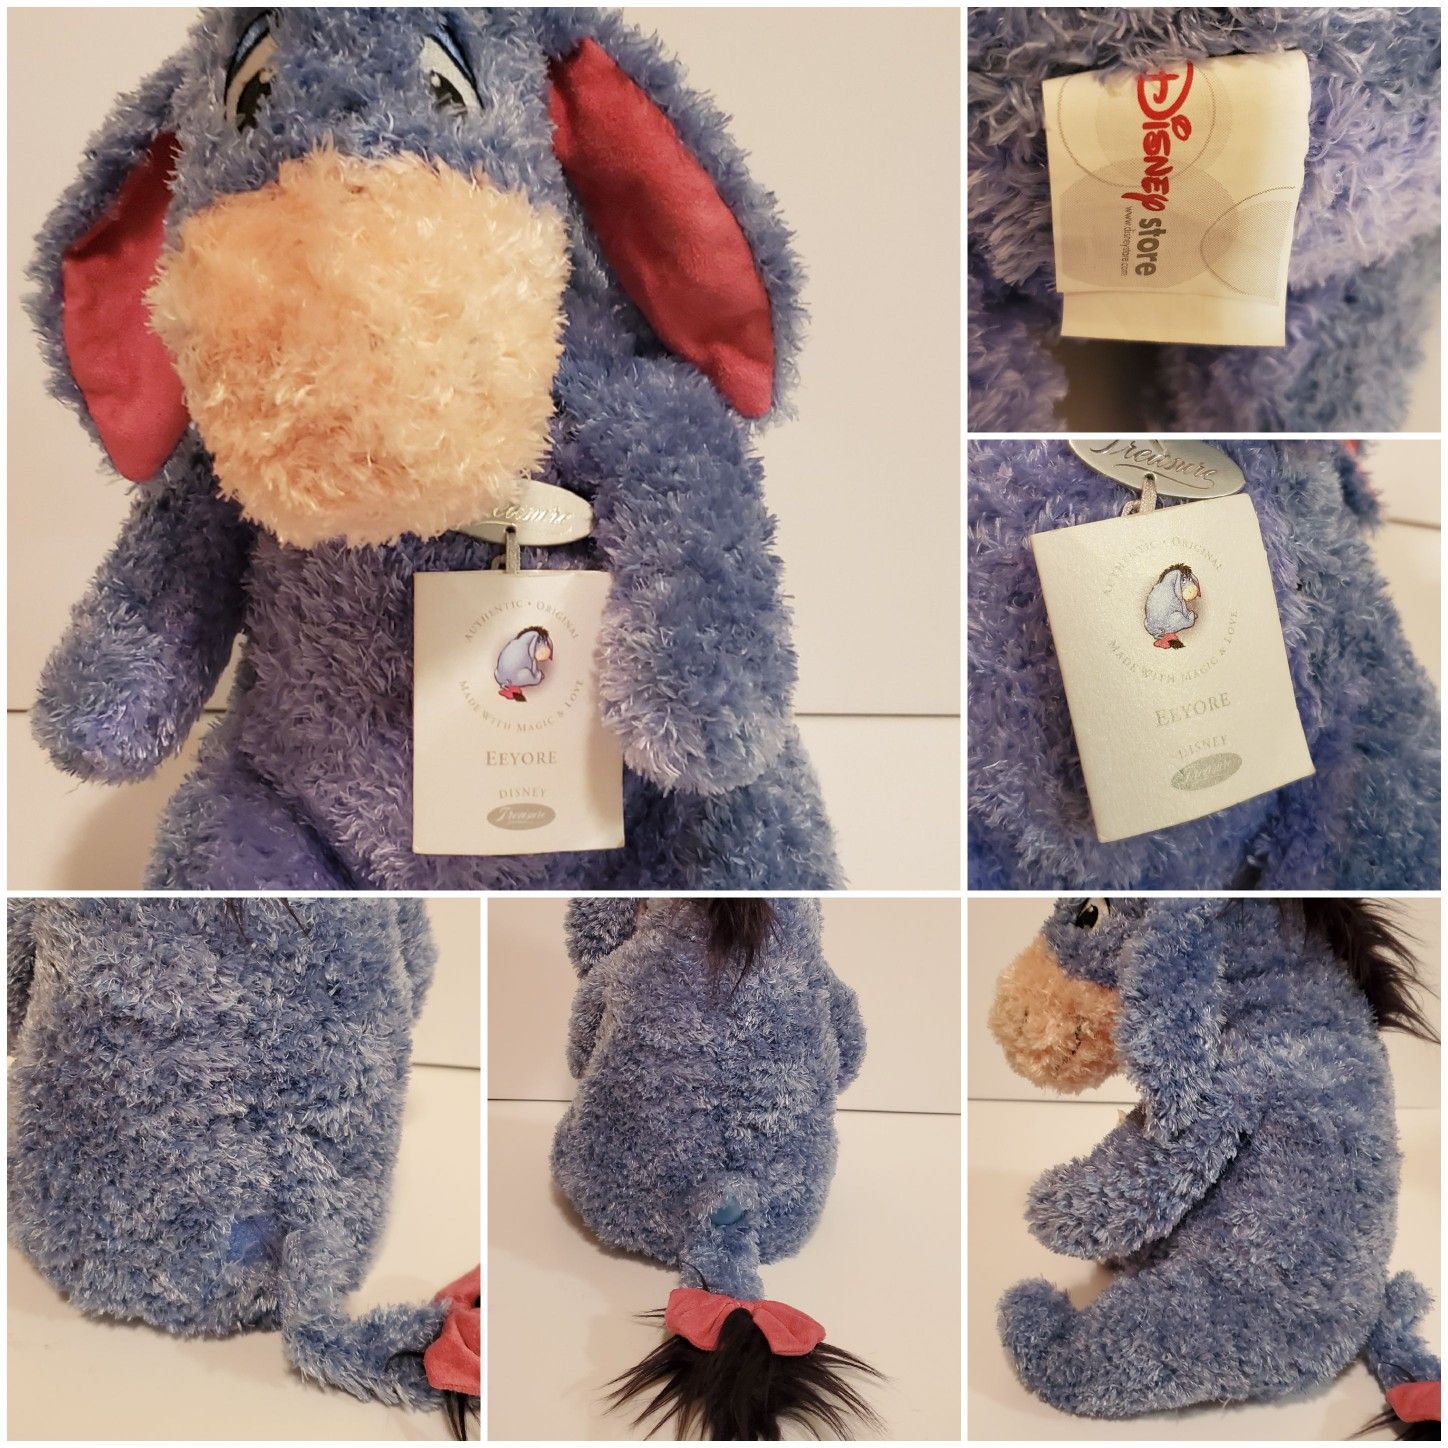 New with tags Disney Treasures Eeyore Stuffed Plush with detachable tail from Winnie the Pooh